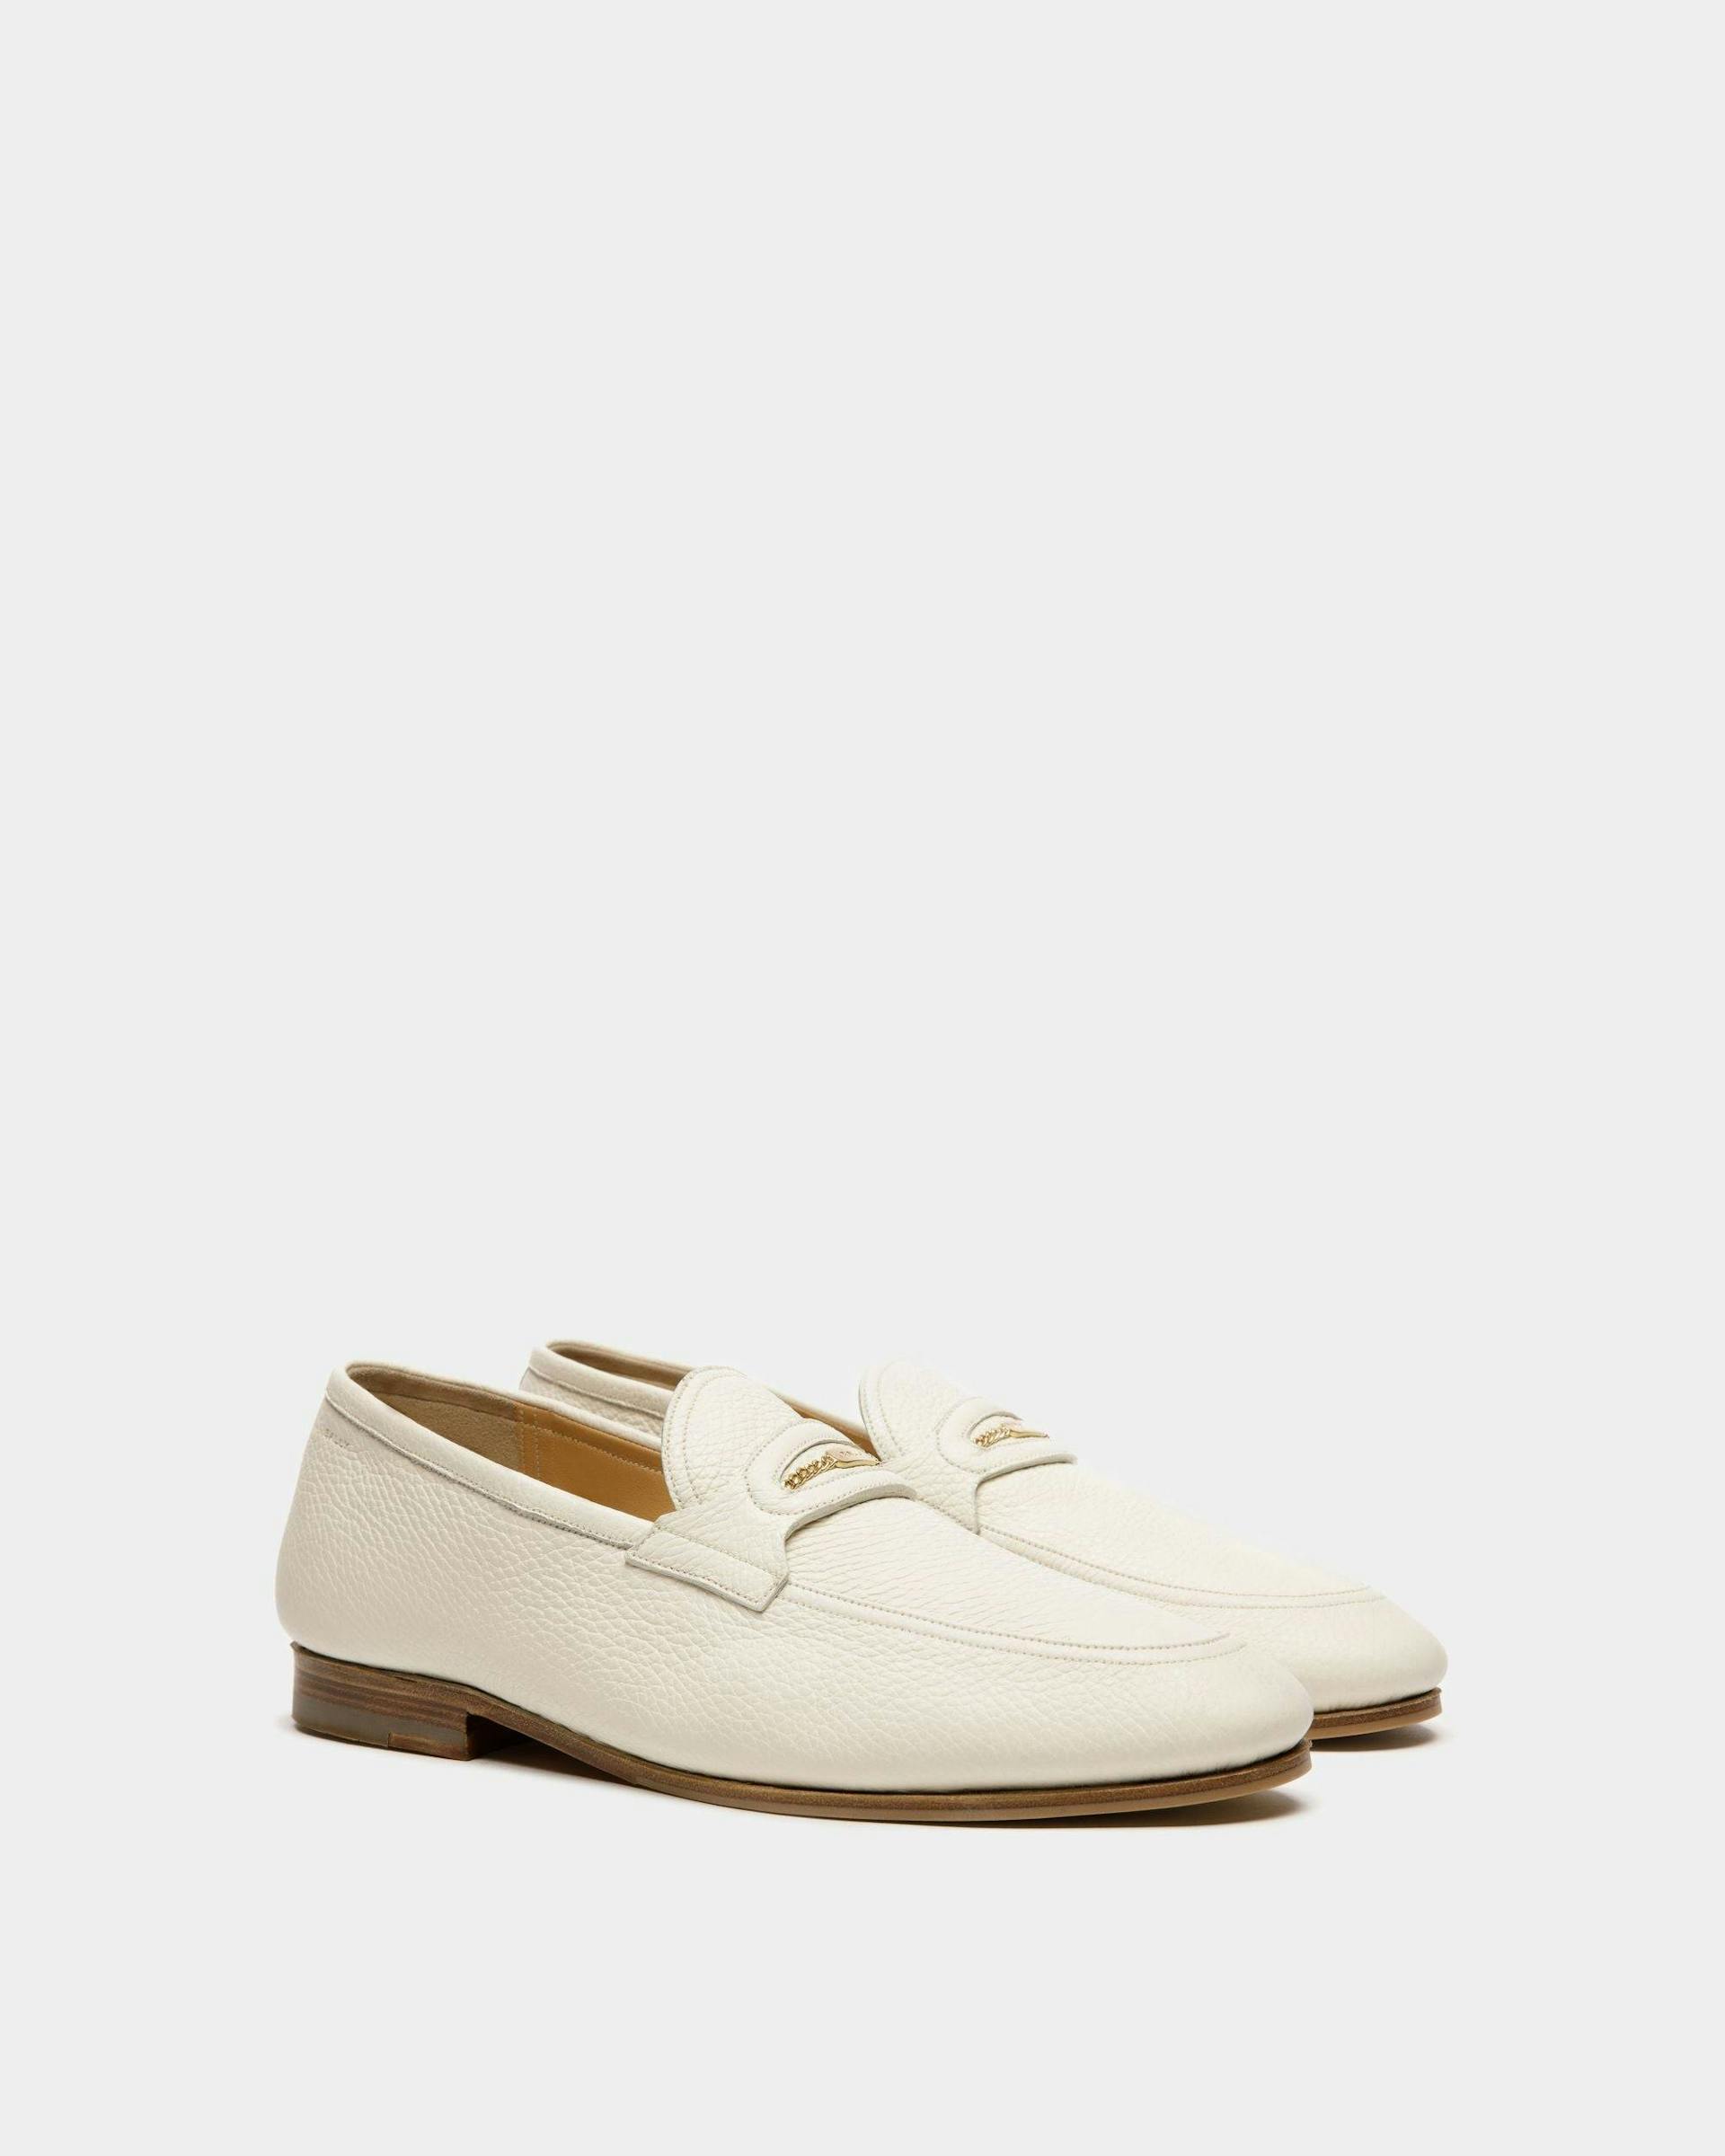 Men's Pesek Loafers In White Leather | Bally | Still Life 3/4 Front